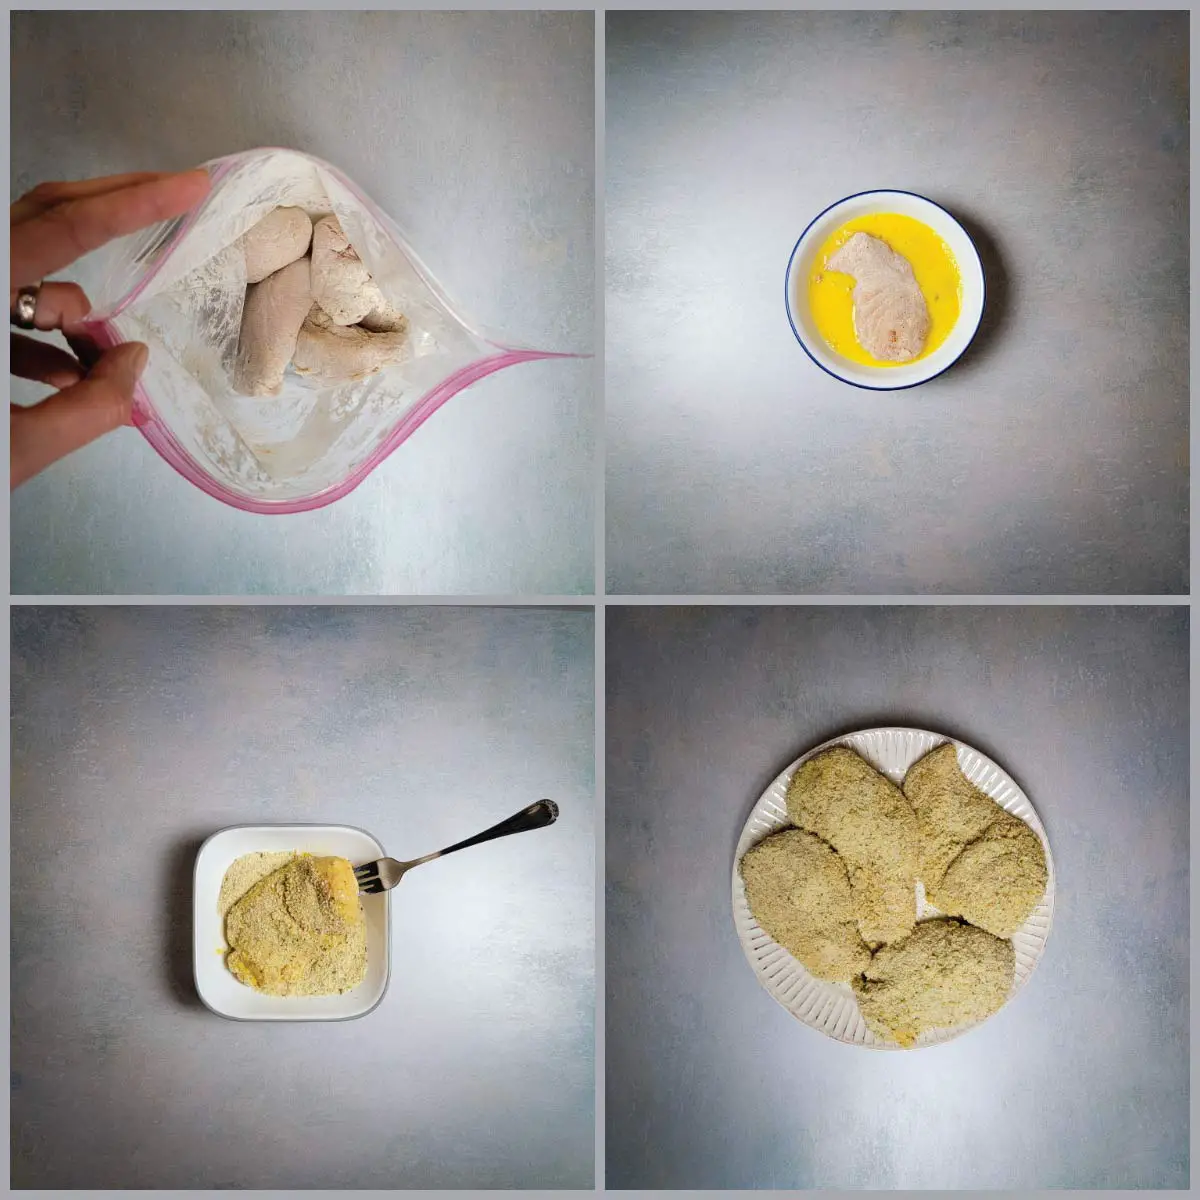 Step by step pictures for breading chicken. Chicken in a gallon sized bag getting coated with flour mixture, then dipped into egg mixture before going into the bread crumb parmesan mixture. Then all 4 breasts coated on a plate.